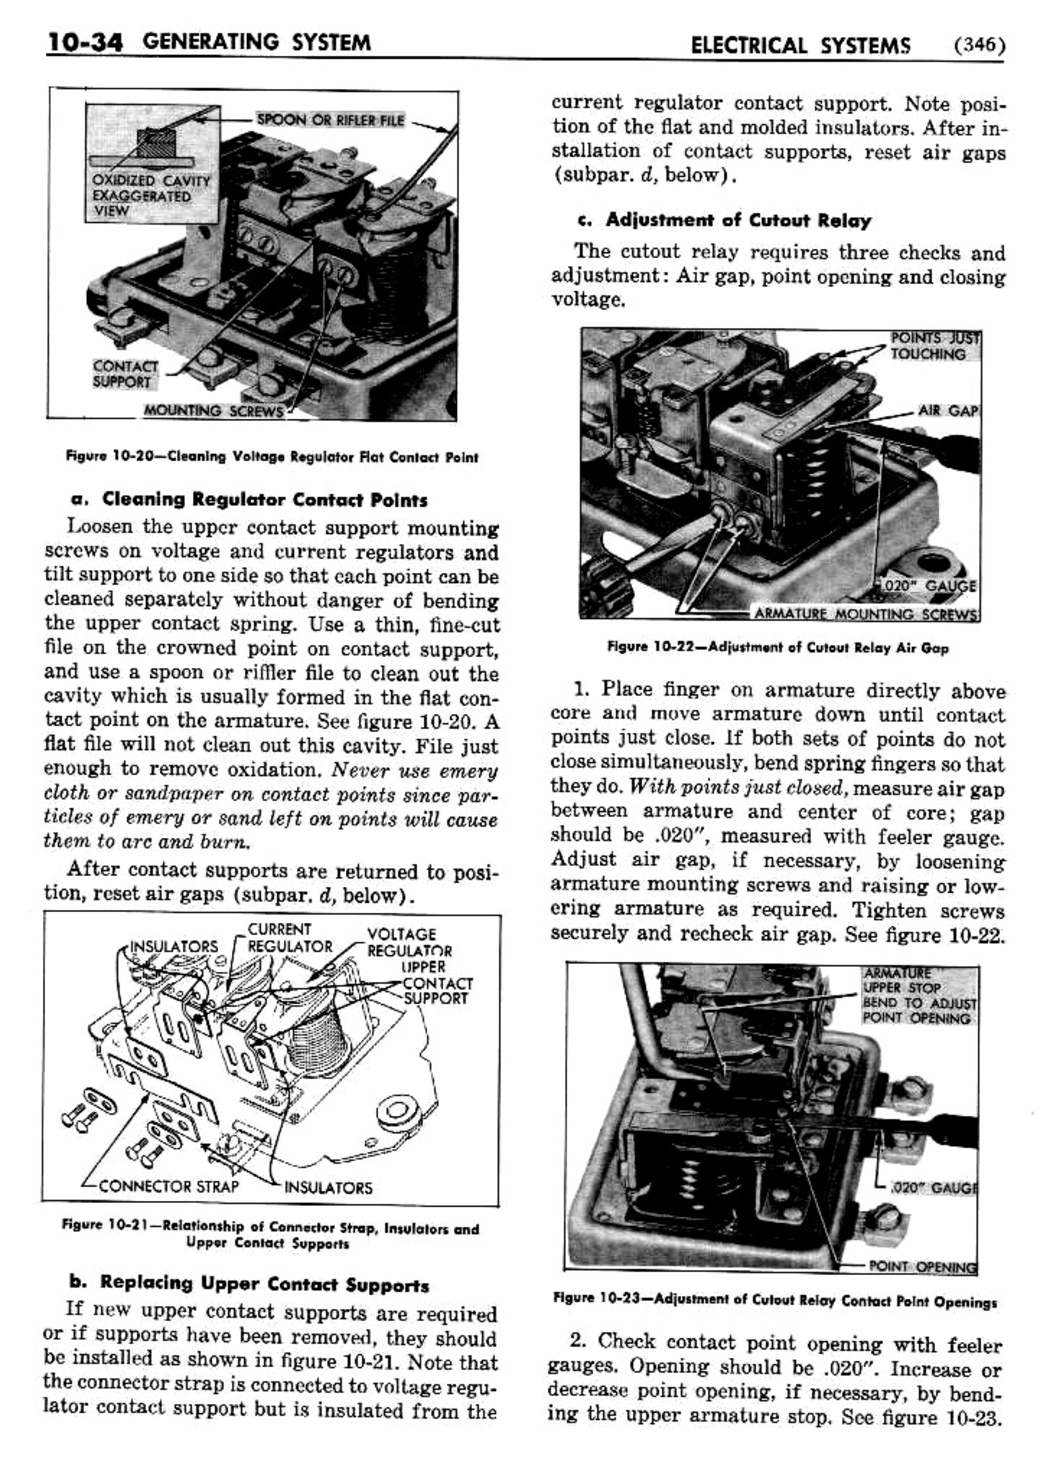 n_11 1954 Buick Shop Manual - Electrical Systems-034-034.jpg